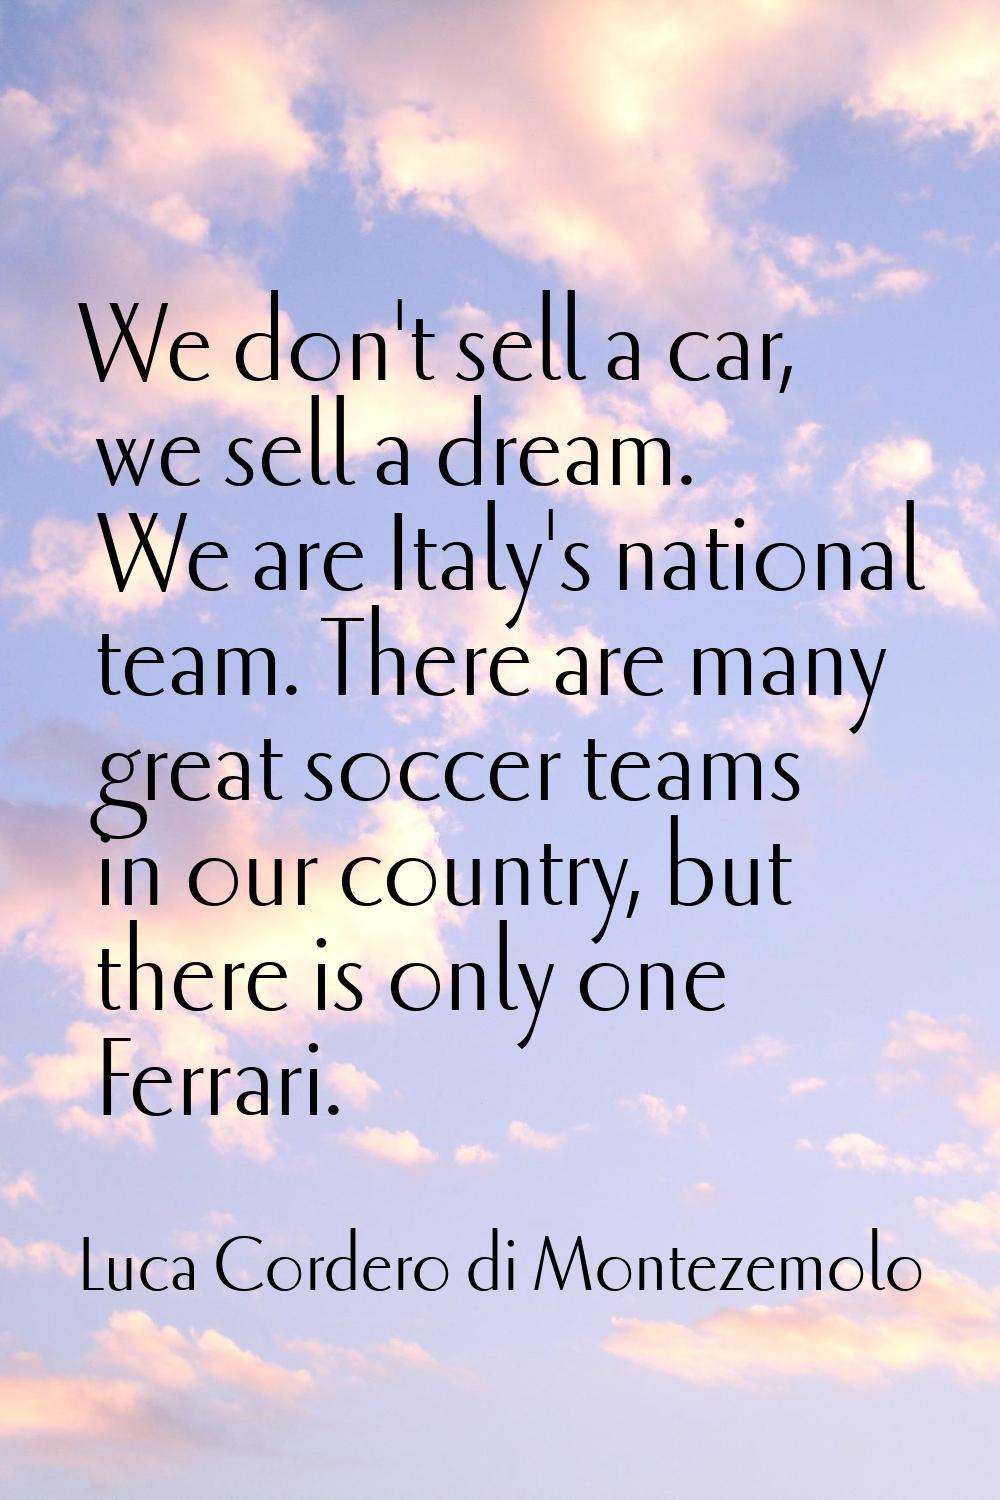 We don't sell a car, we sell a dream. We are Italy's national team. There are many great soccer tea